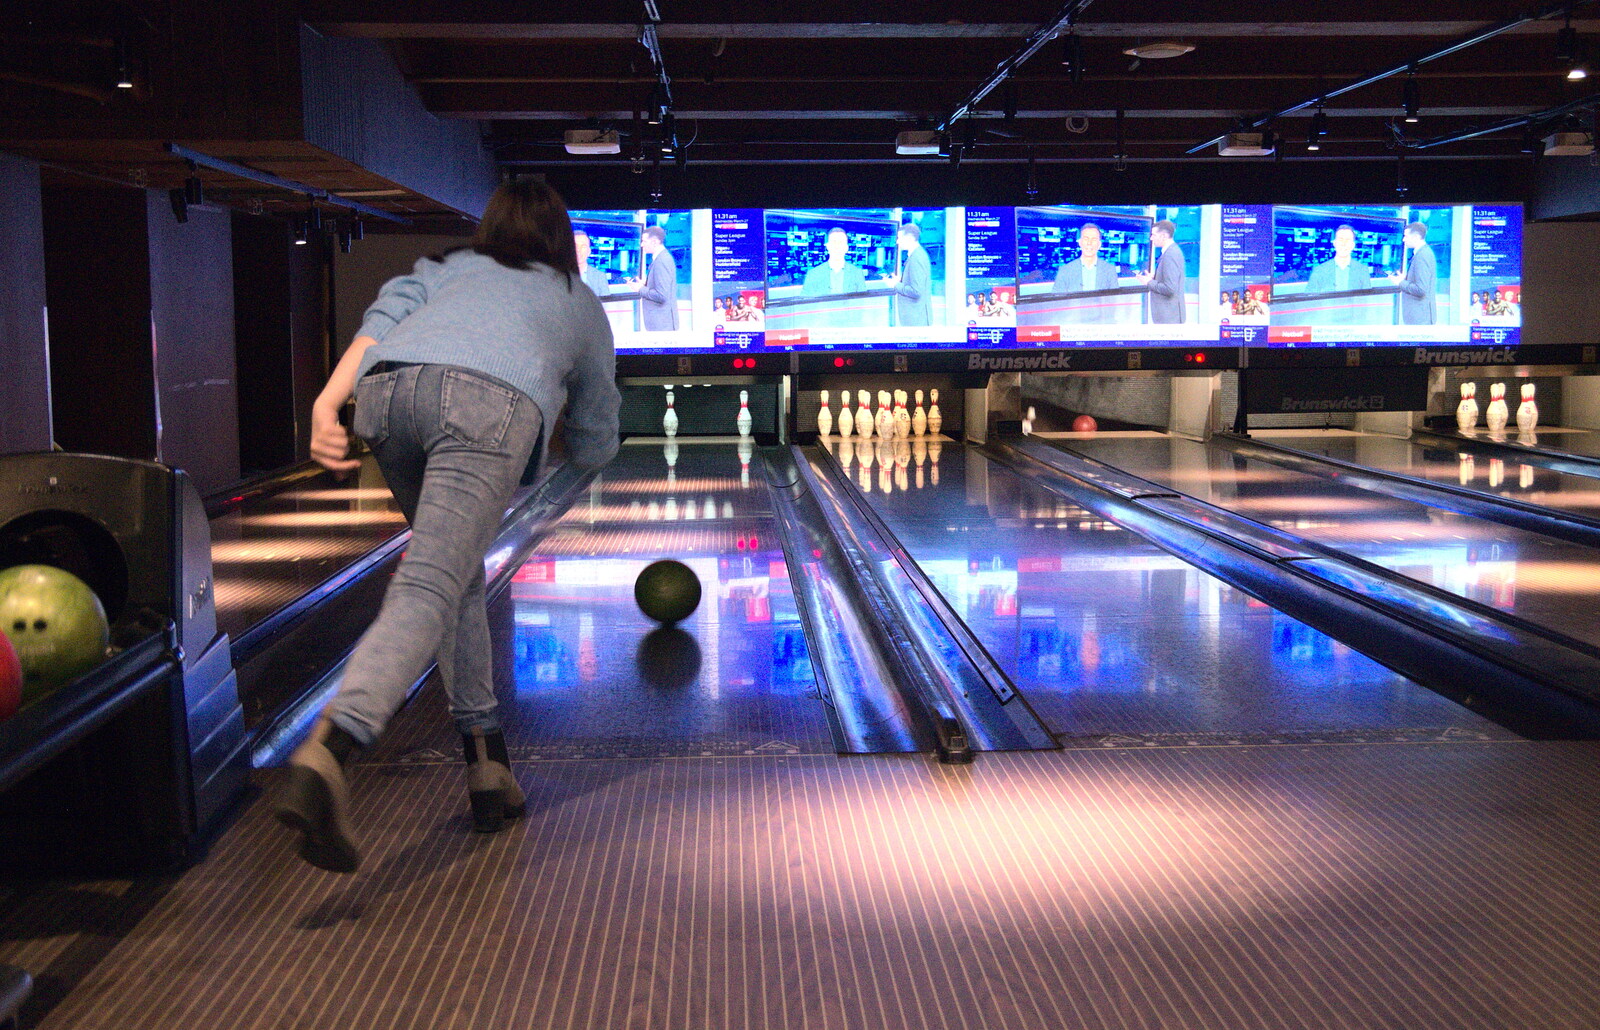 There's some bowling action from A Team Outing at Namco Funscape, South Bank, London - 27th March 2019